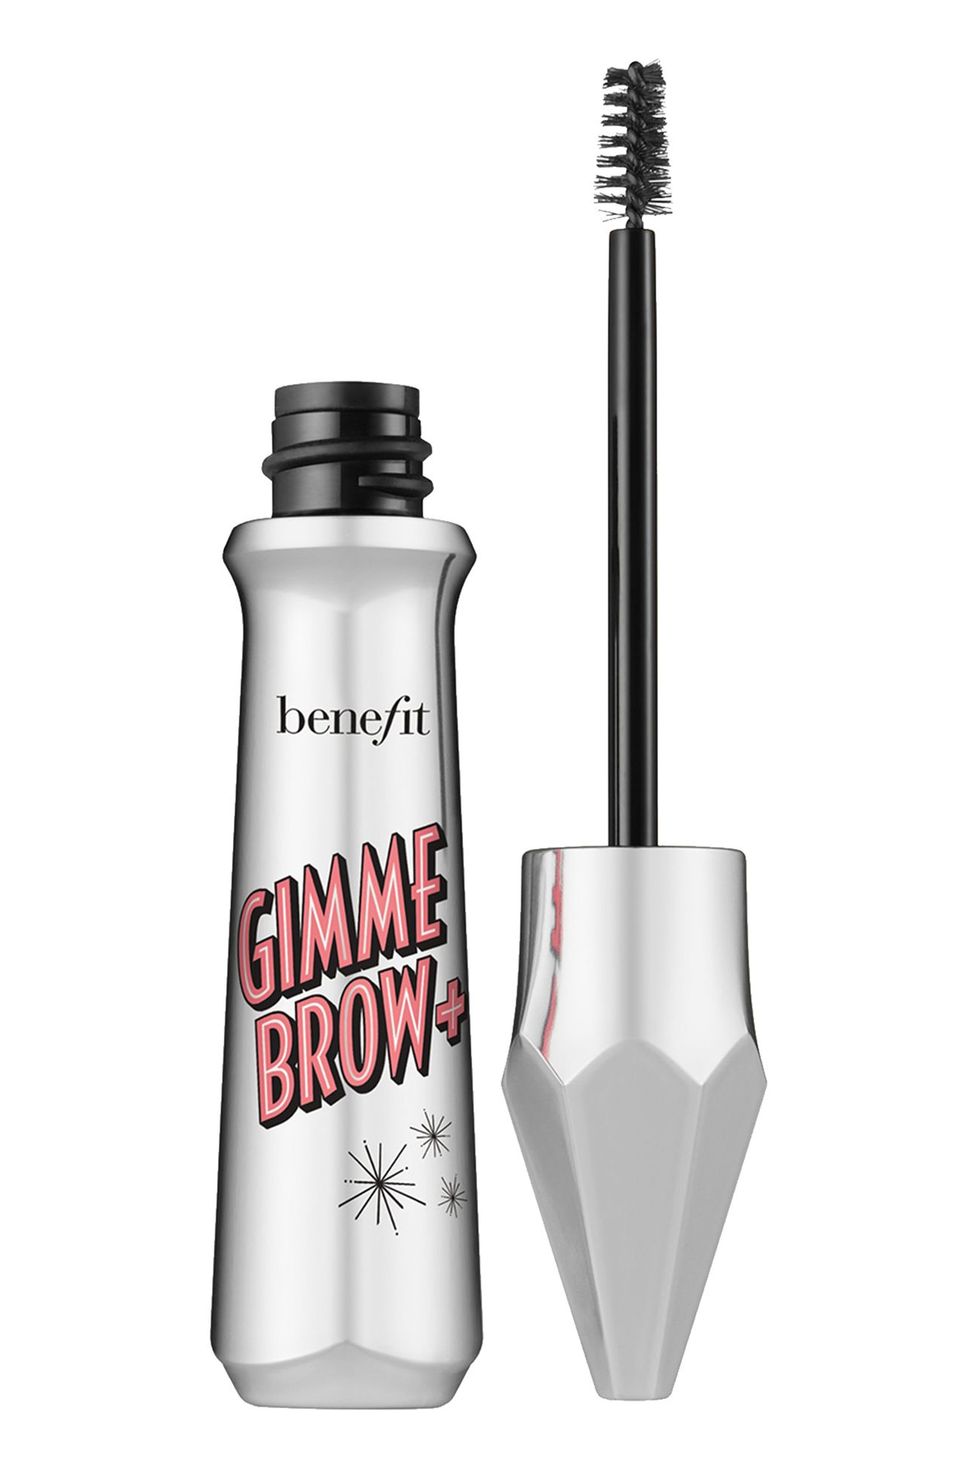 Benefit Cosmetics Gimme Brow+